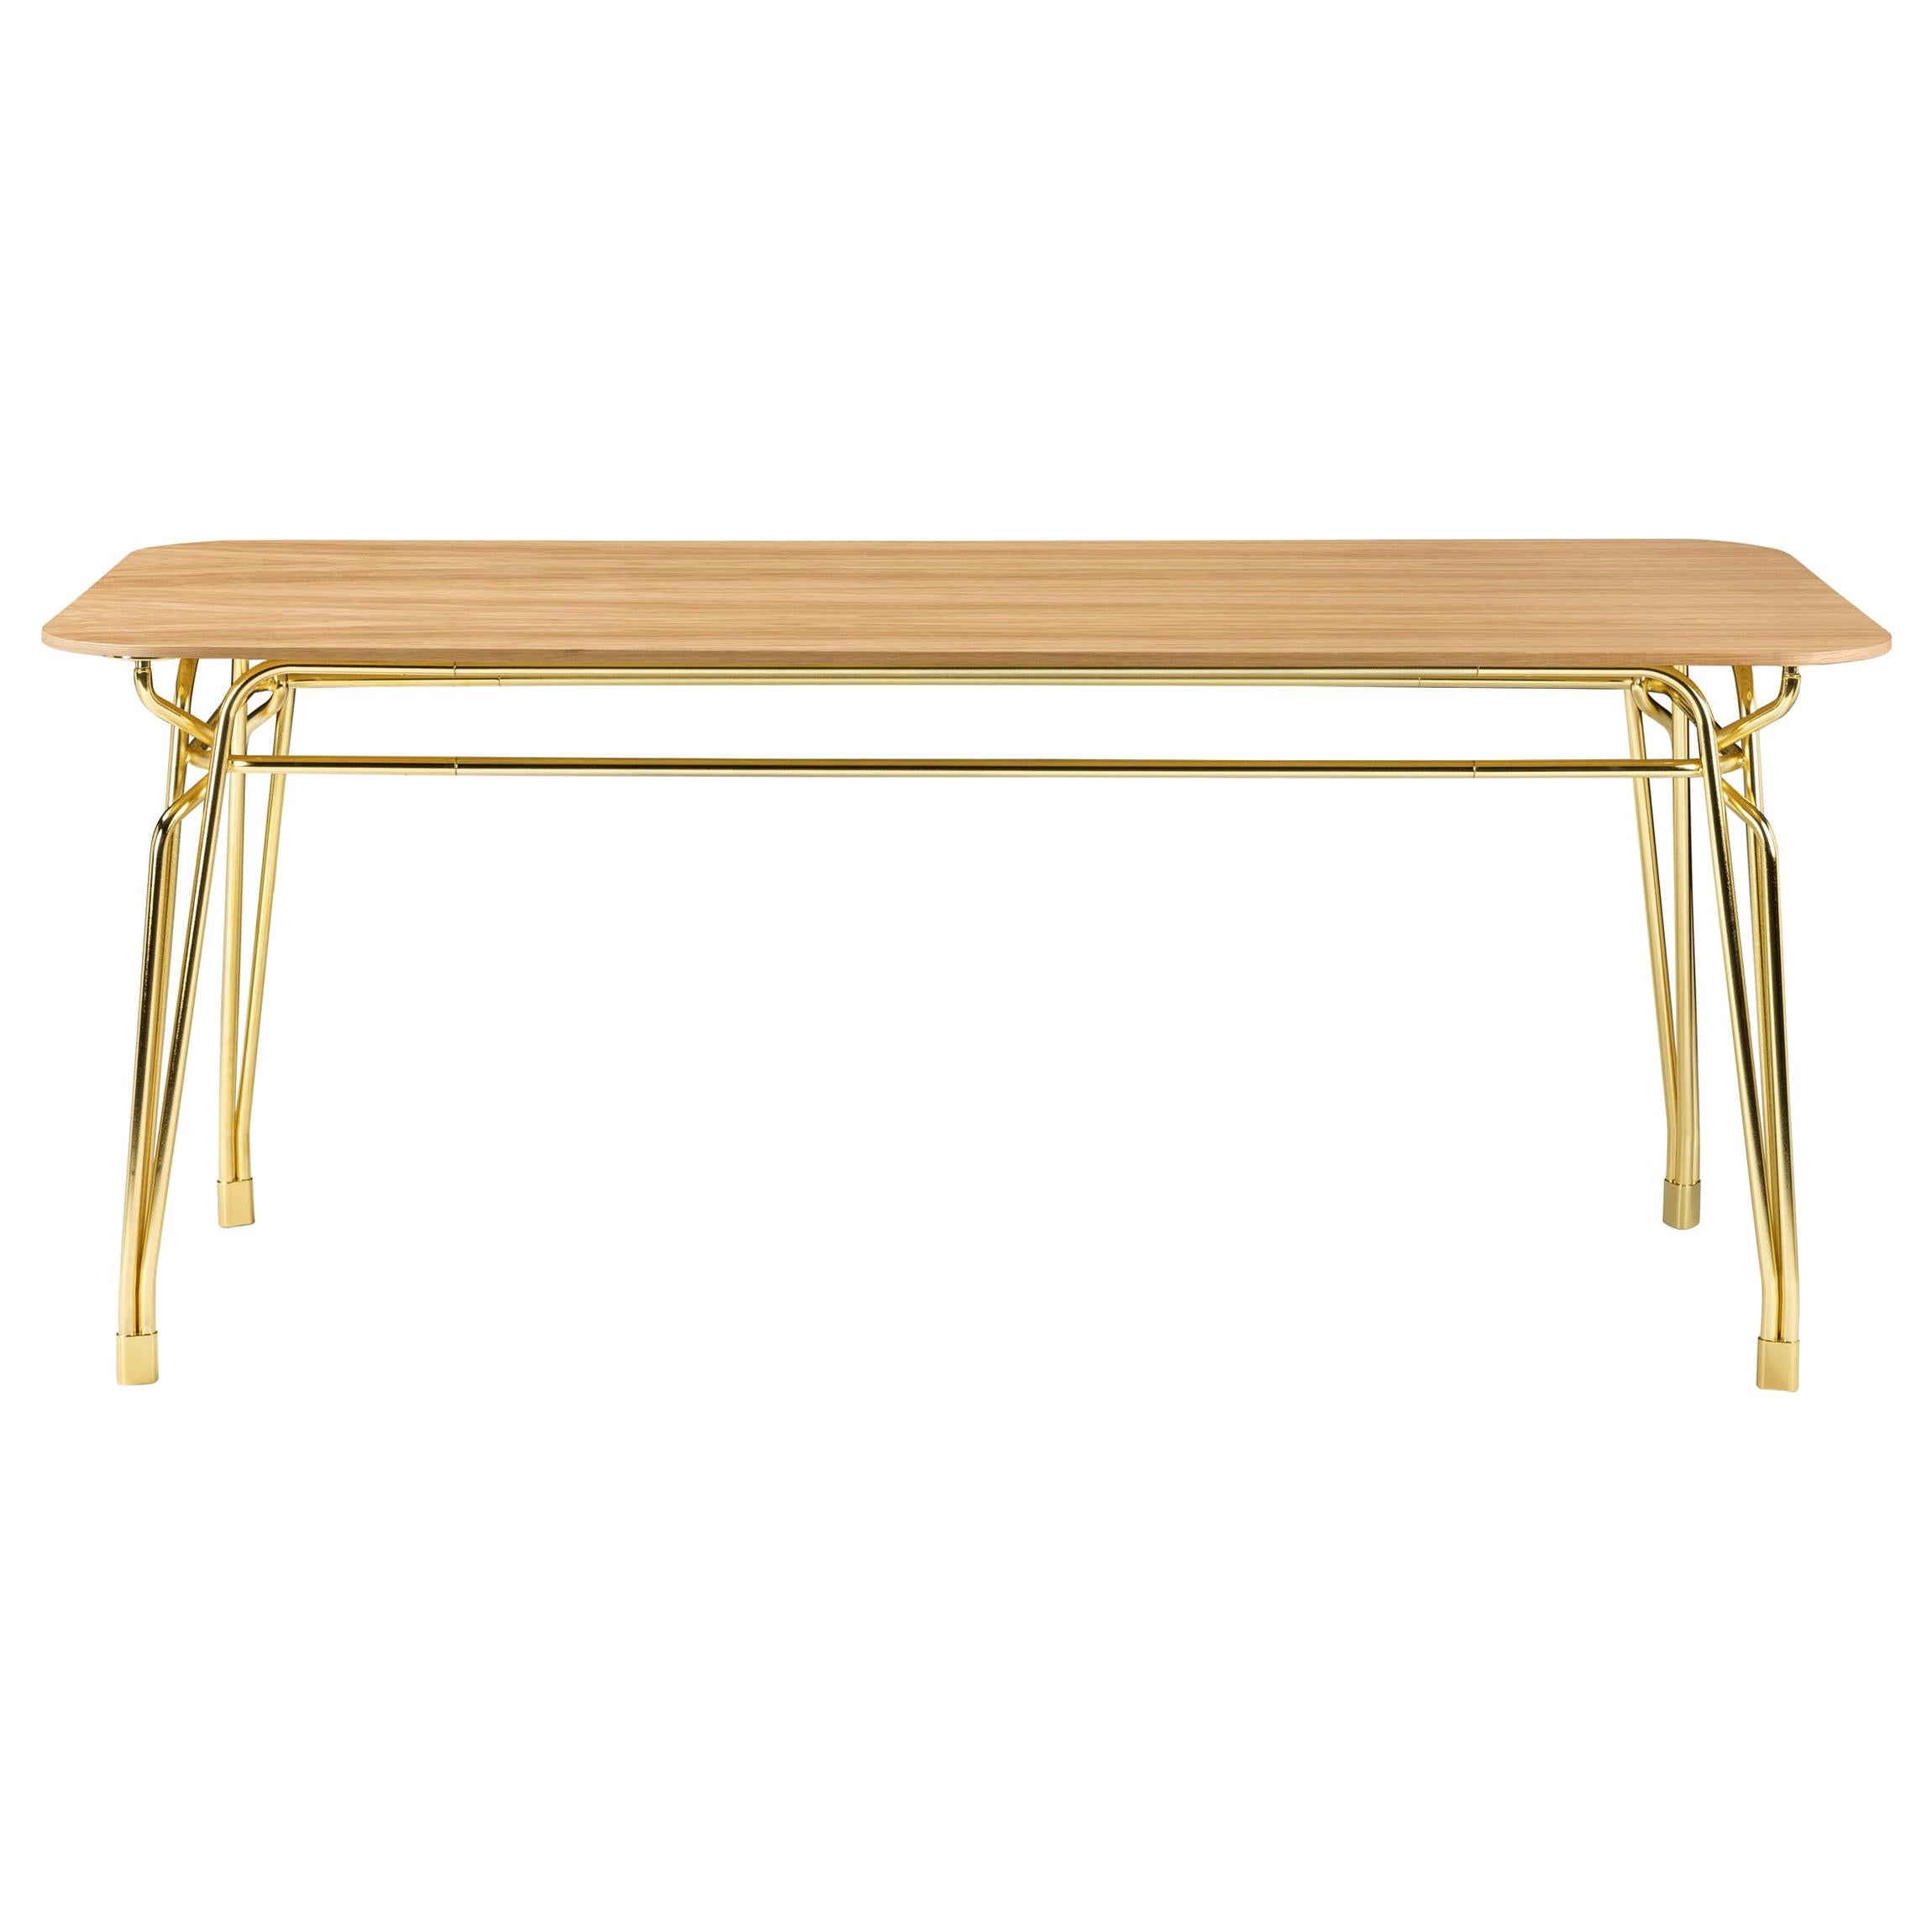 Botany Dining Table in Striped Oak Top with Polished Brass Legs